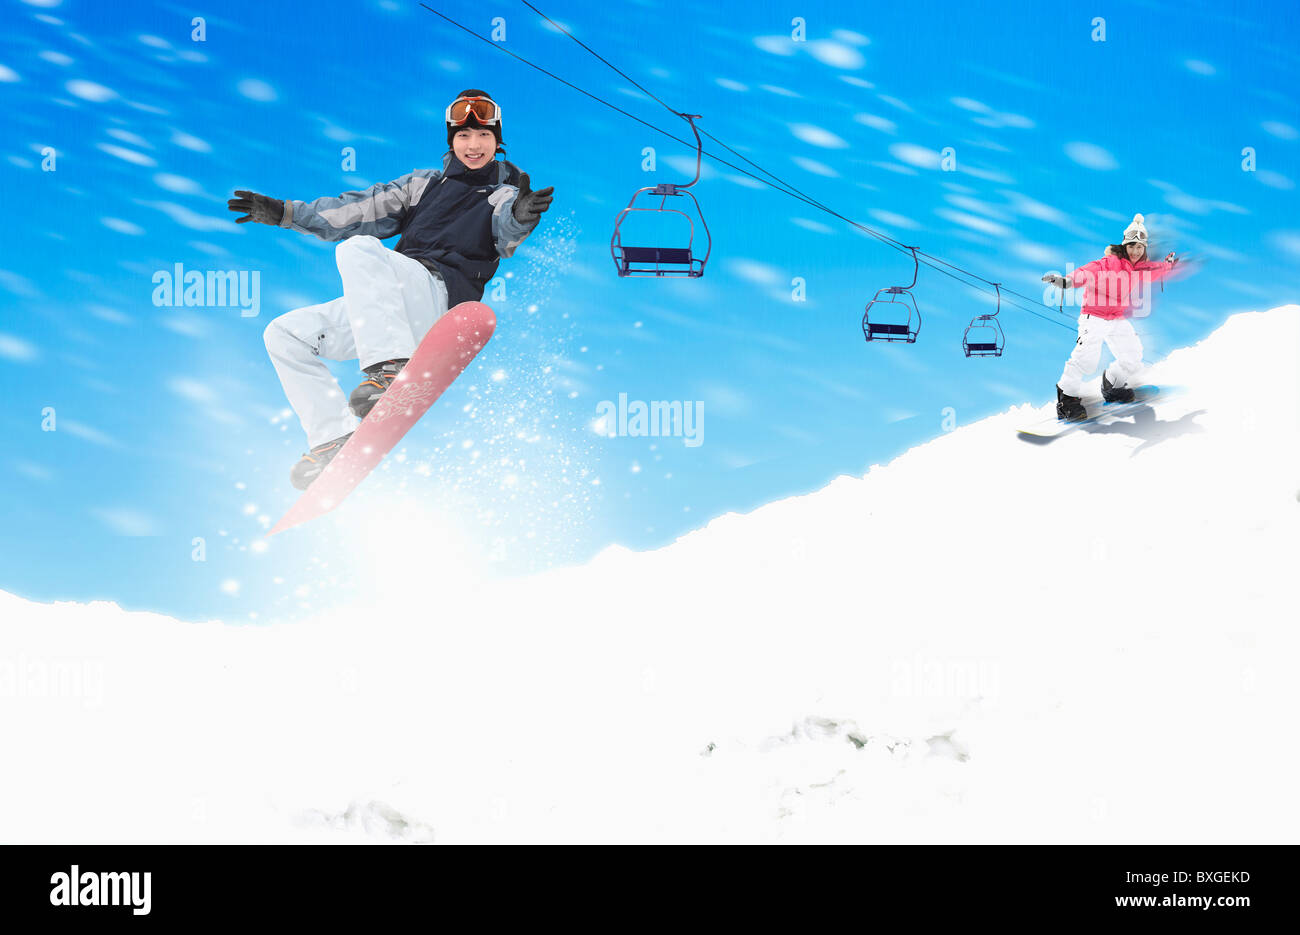 people are snow boarding Stock Photo